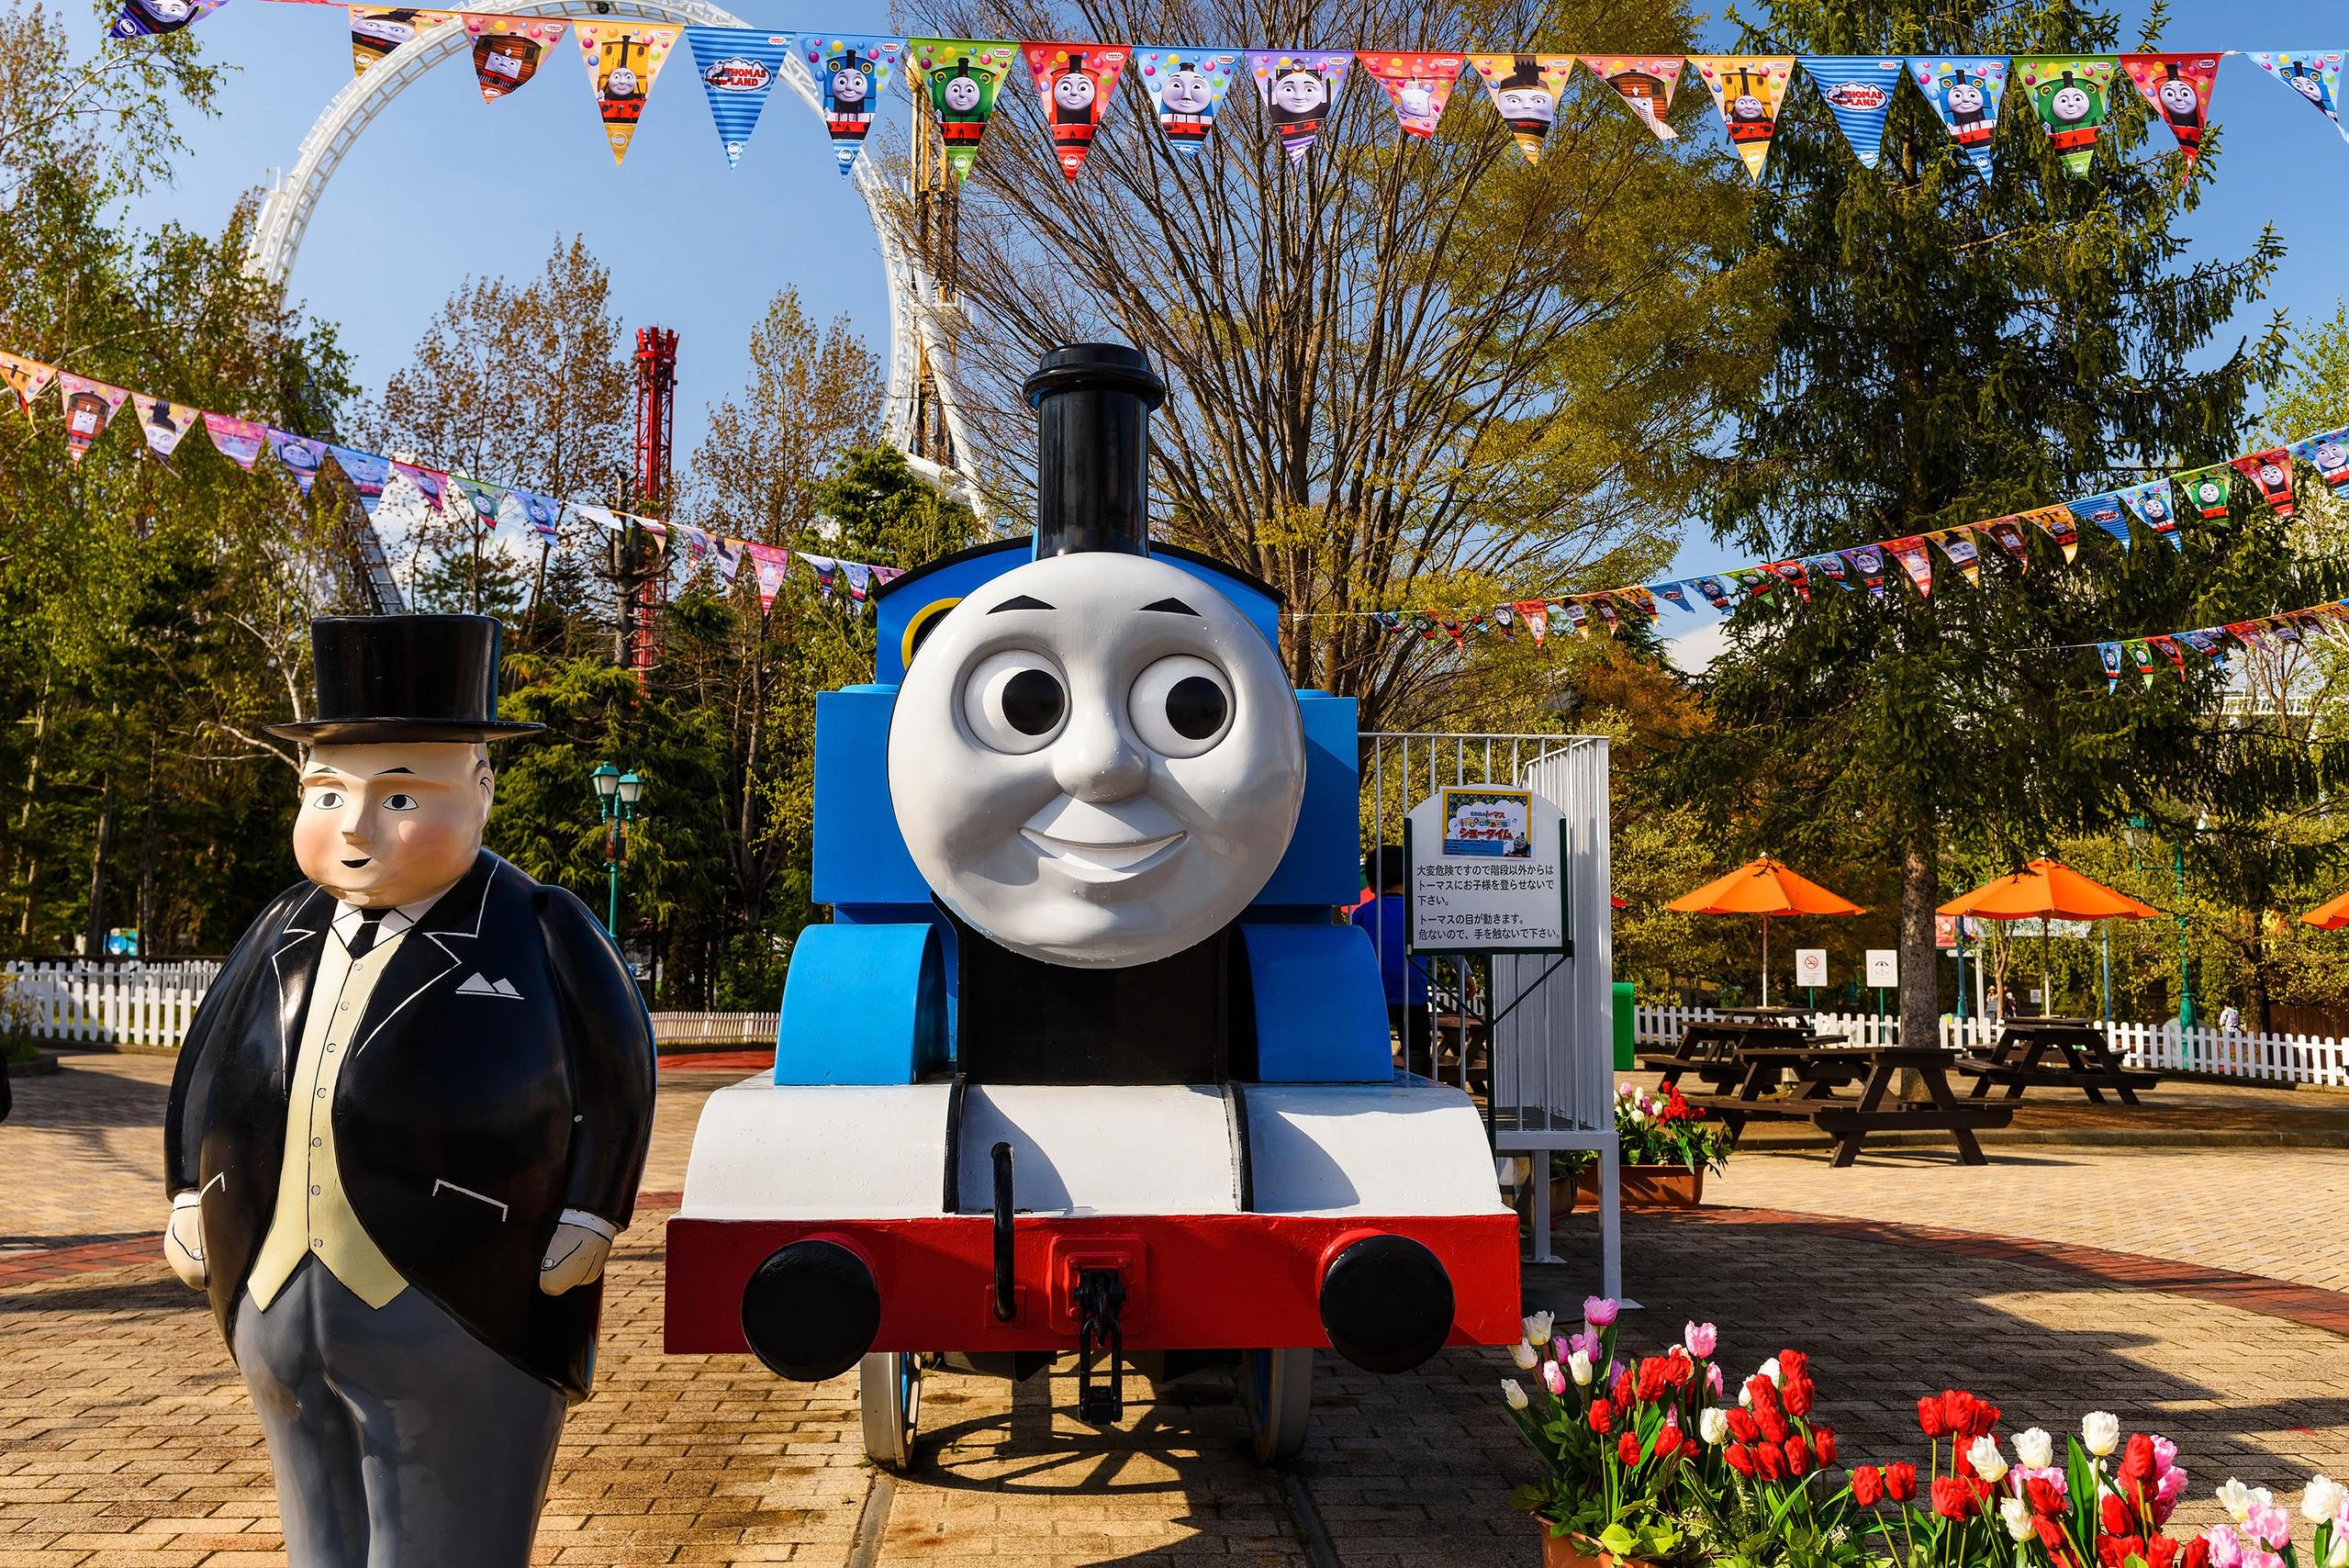 Thomas the tank engine and Fat Controller monuments at Thomas land theme park in Fuji-Q Highland amusement park.